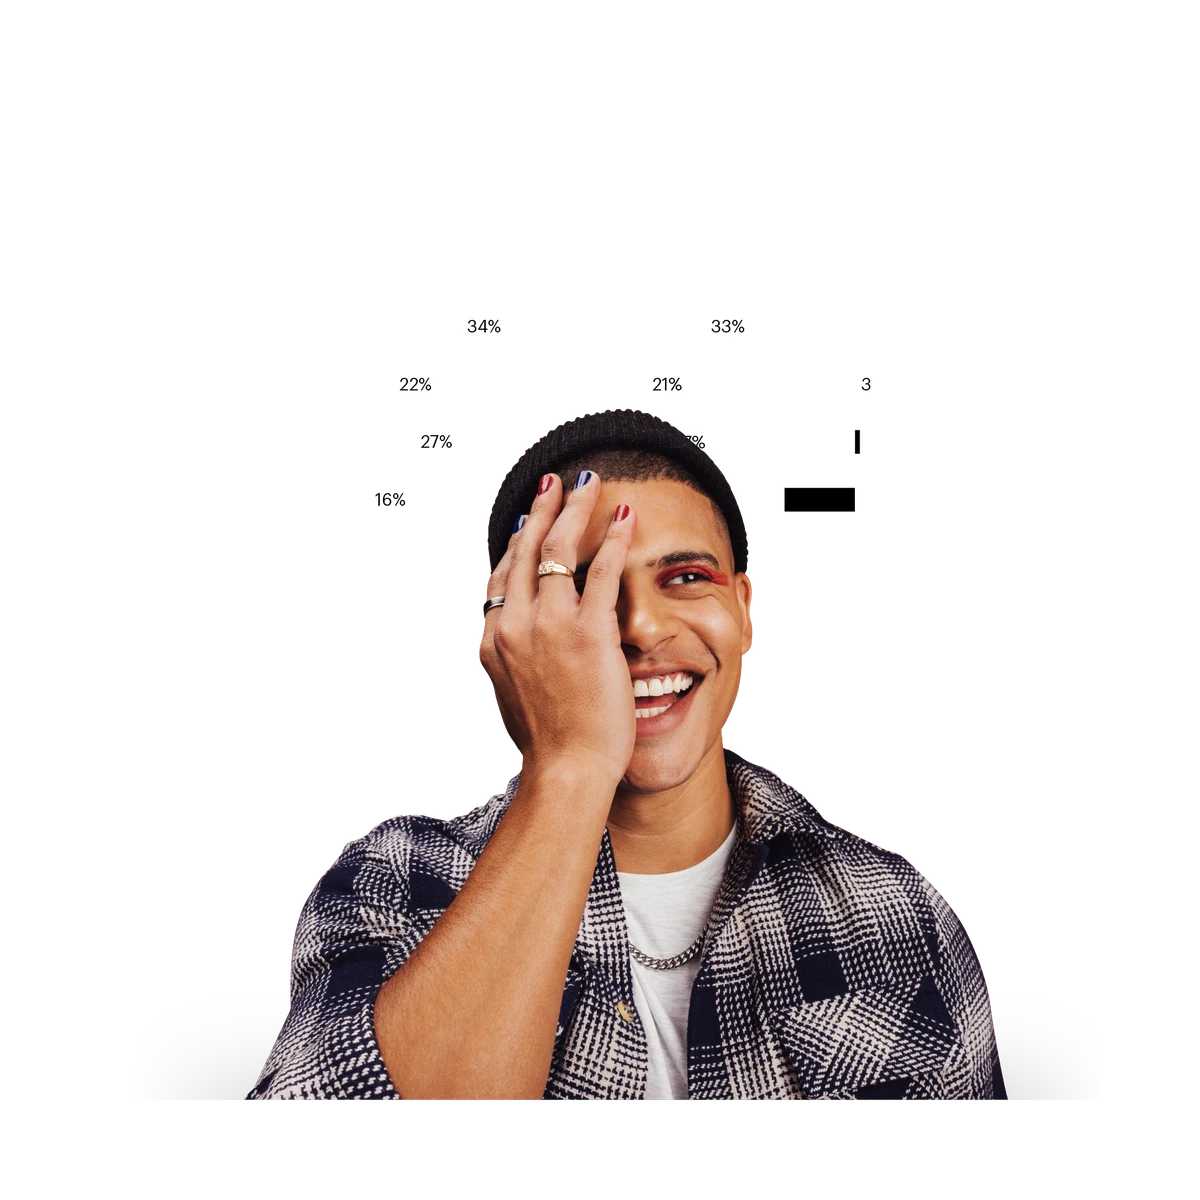 man with hand over face and demographic chart behind